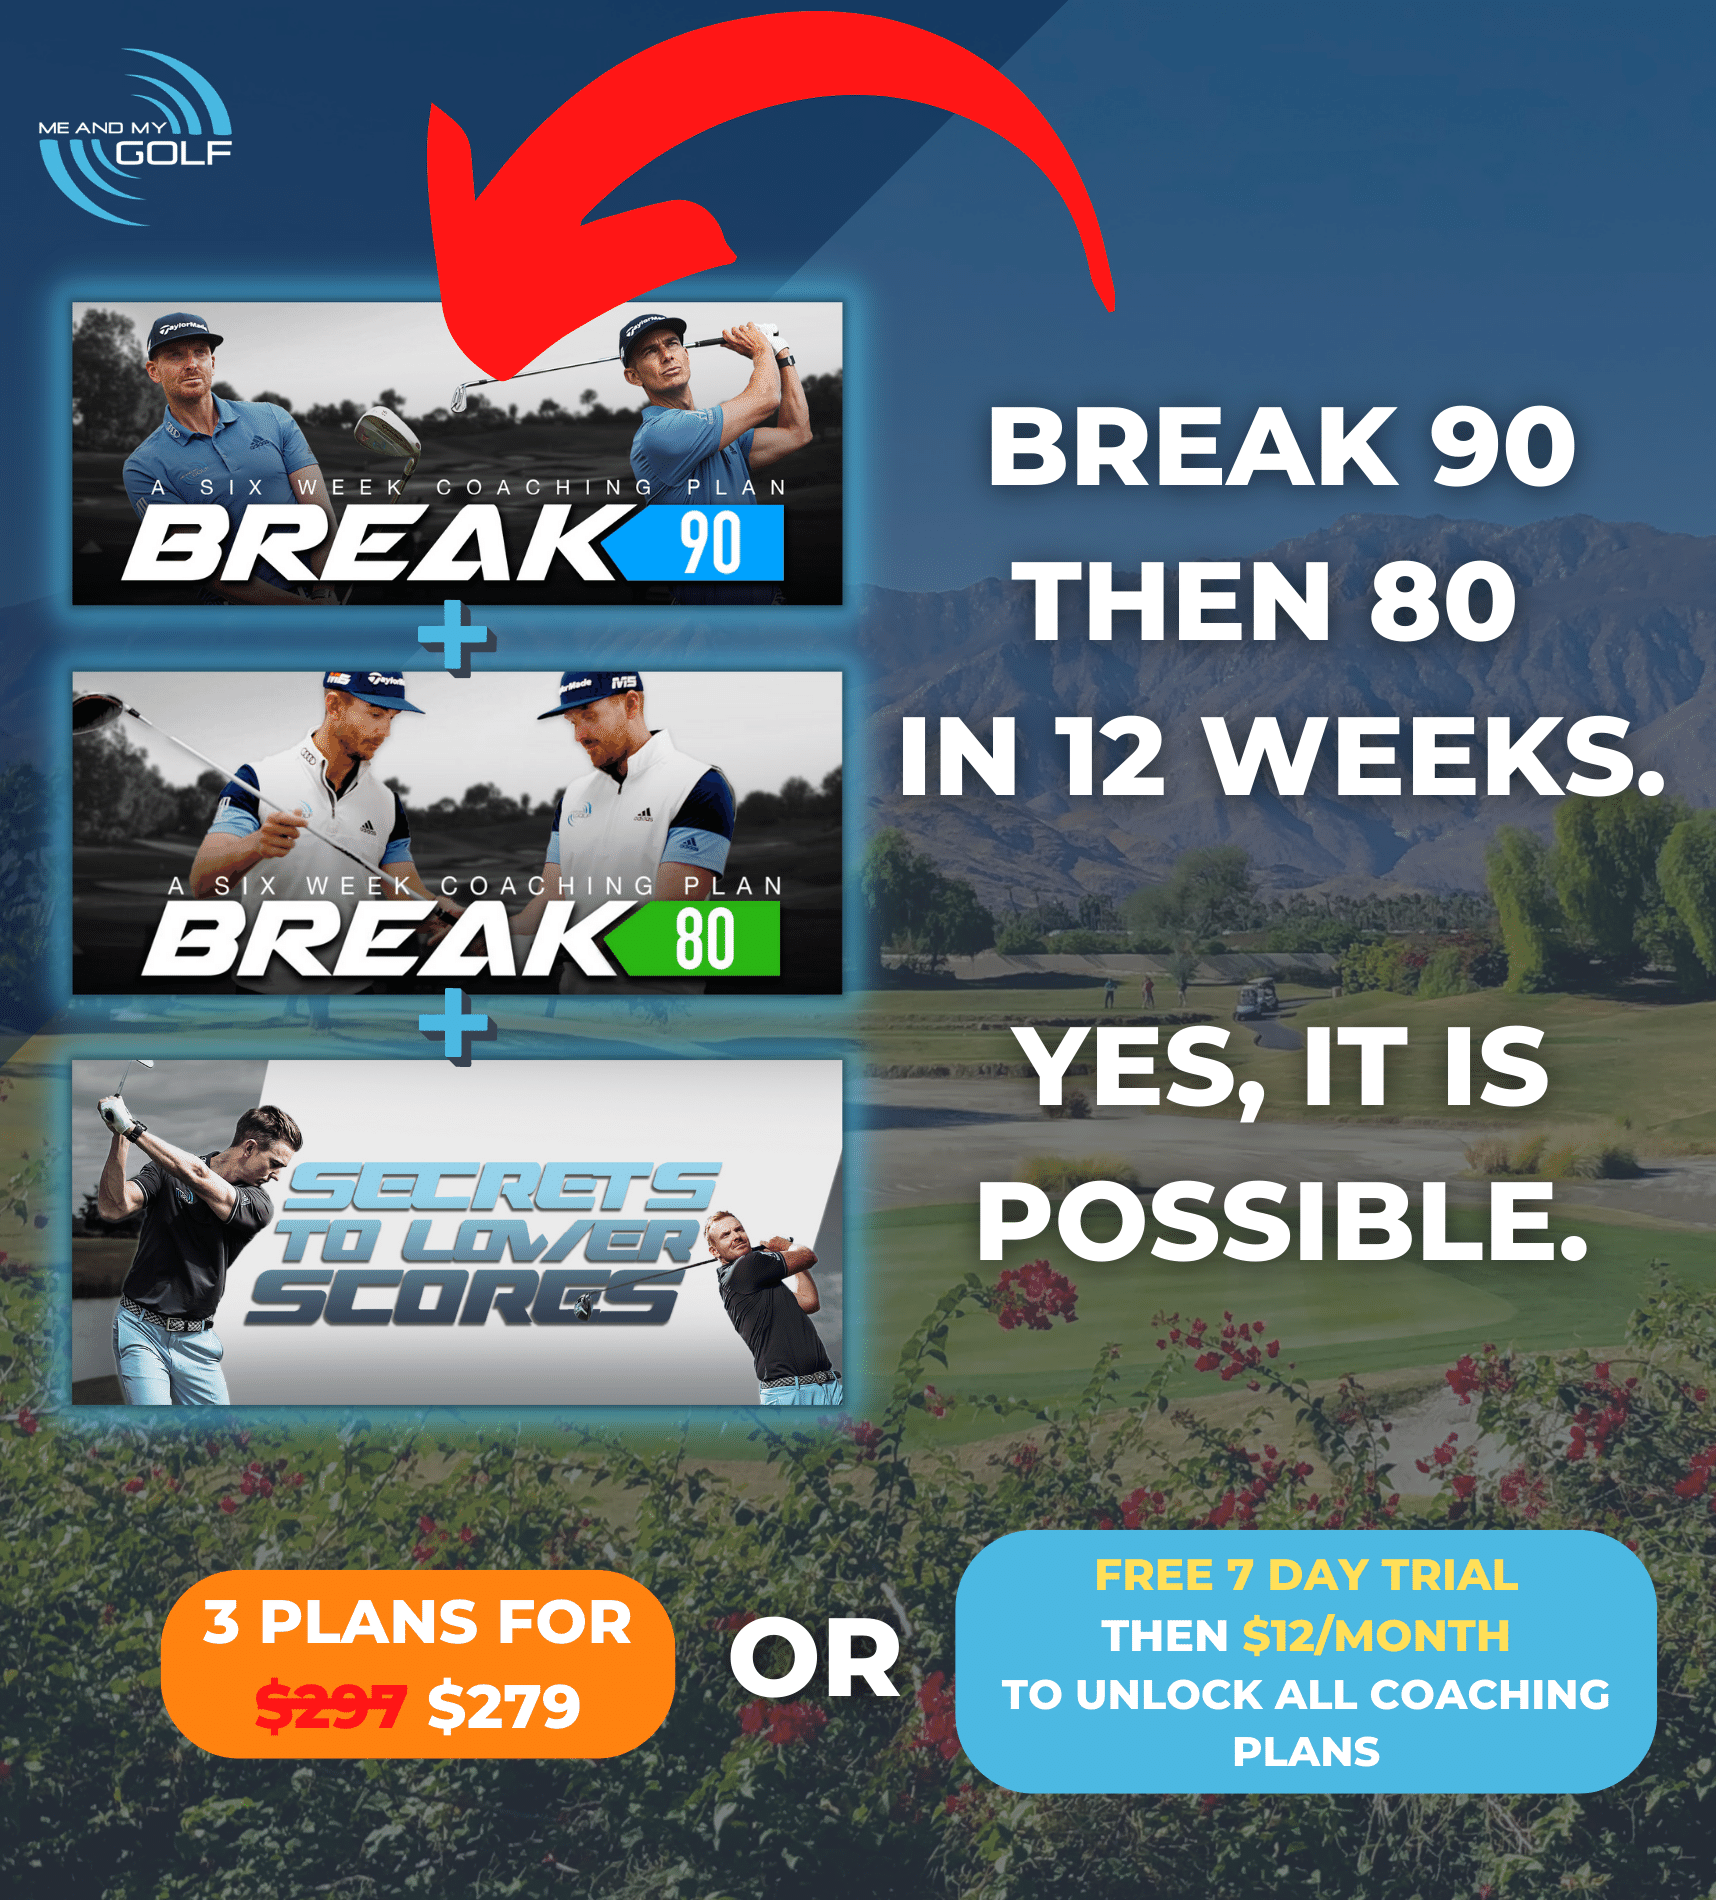   You Can Break 90 AND 80 in 12 Weeks... Here's How   - Me And My Golf